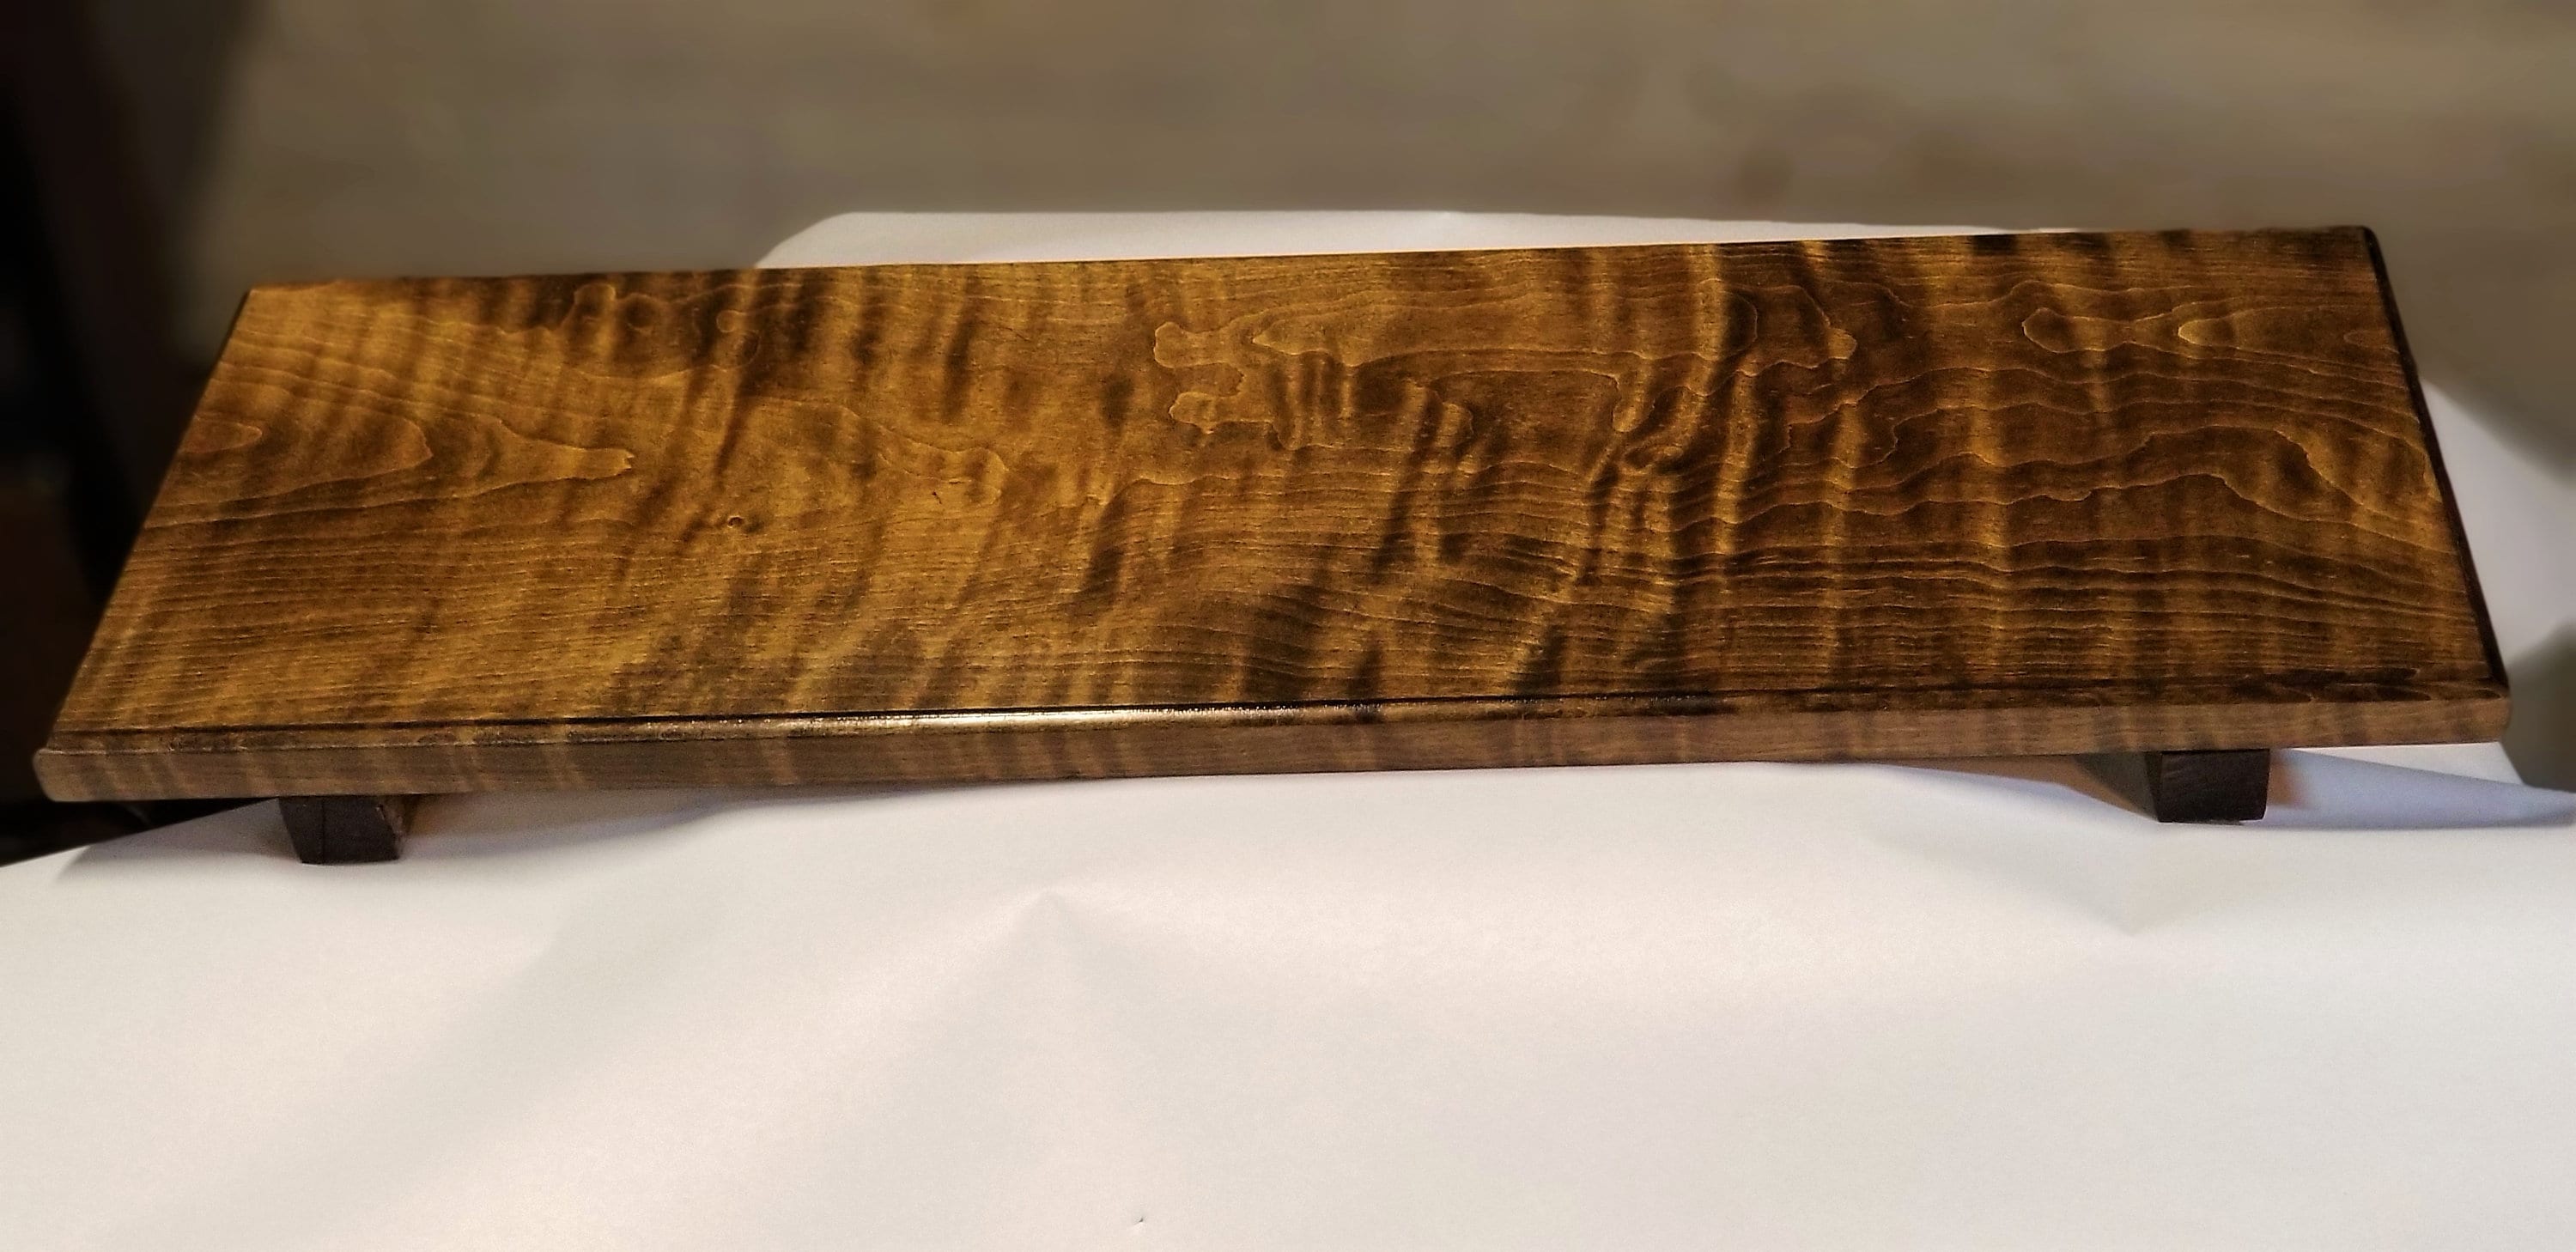 Wood Coloring With Keda Dye on Tumblr: M14's saved from the Military scrap  pile and restored with Keda Dye